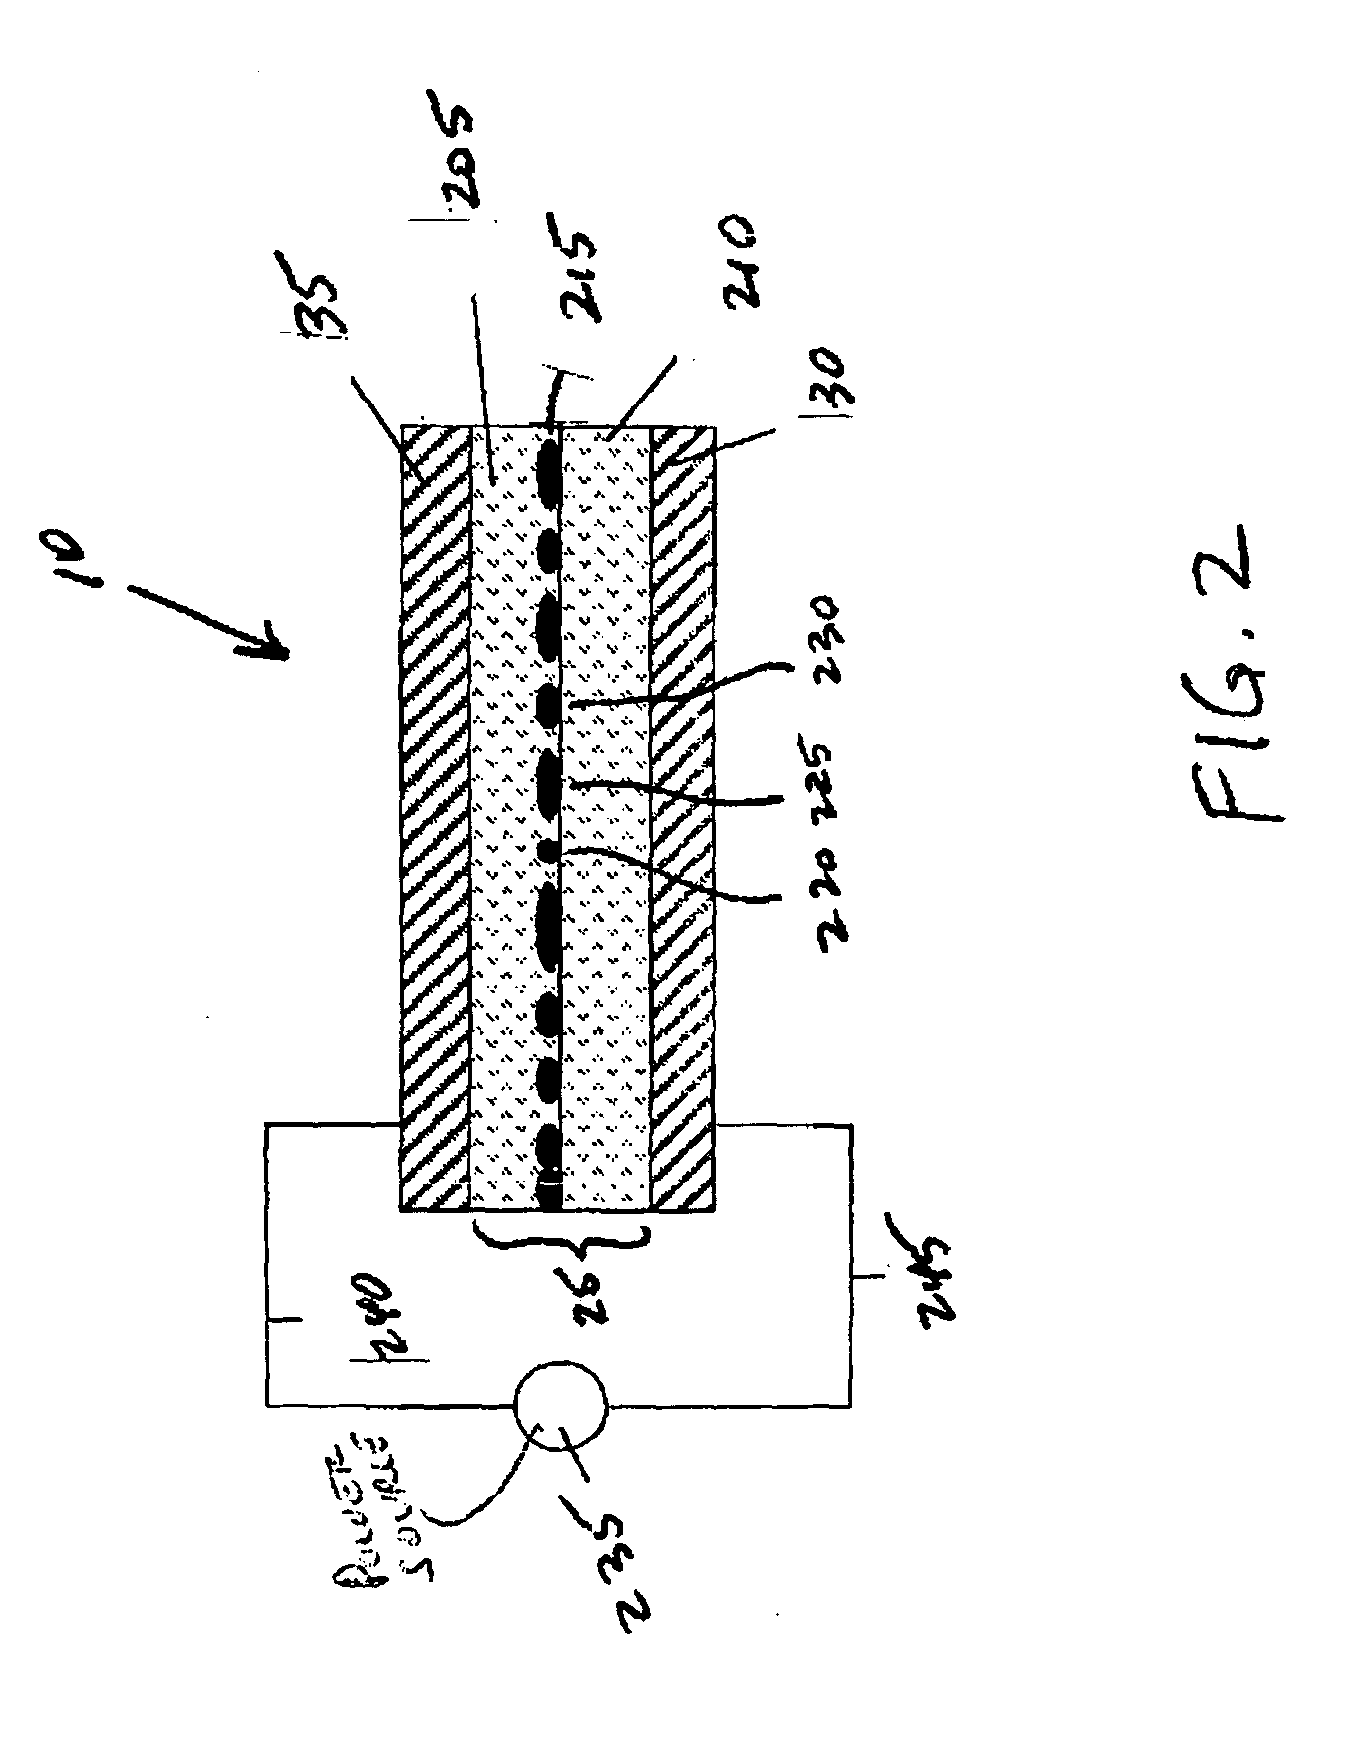 Non-volatile multi-stable memory device and methods of making and using the same